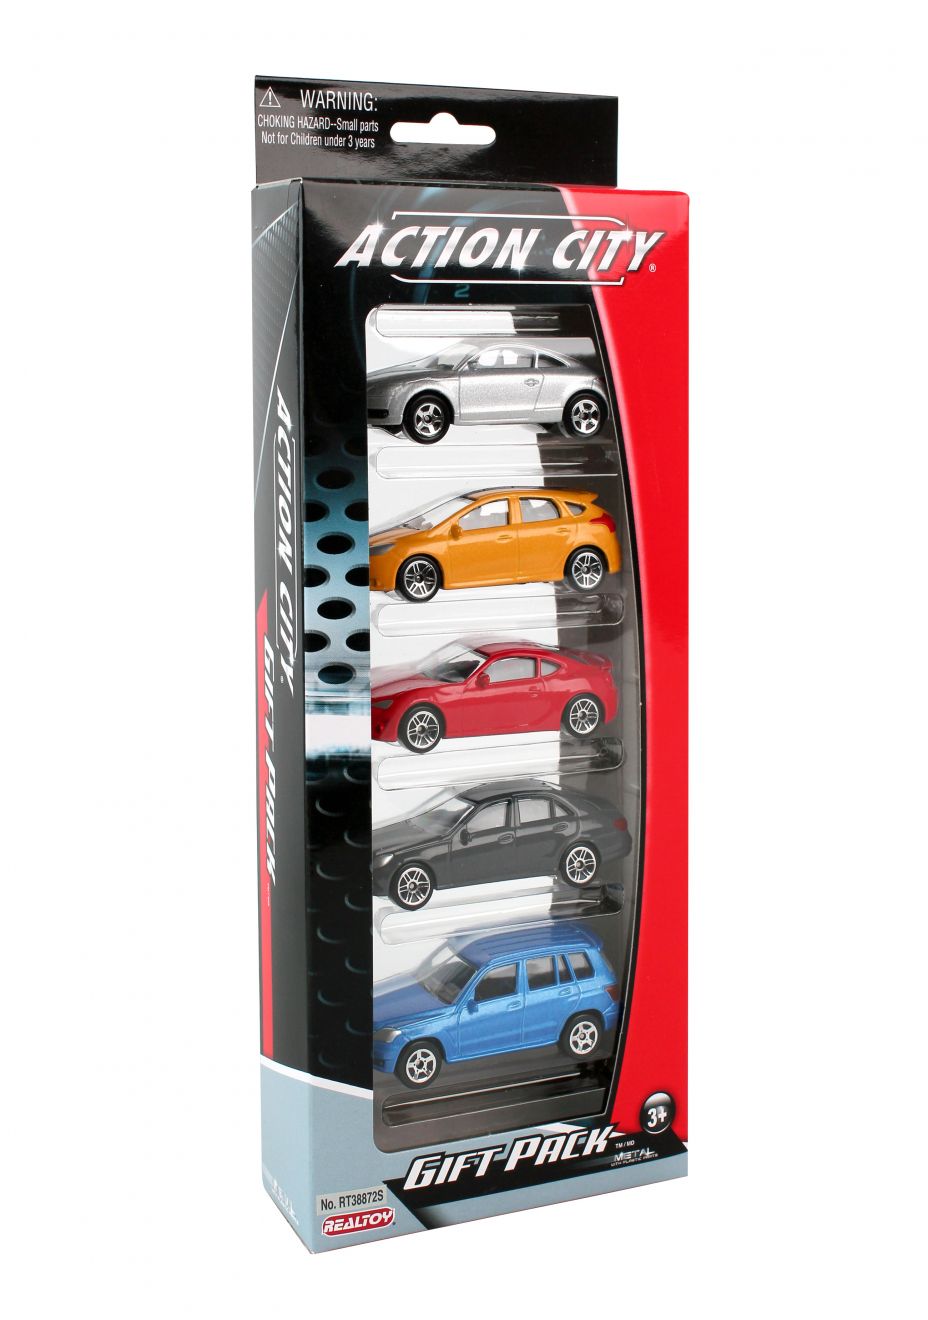 STREET CAR 5 PIECE VEHICLE GIFT PACK